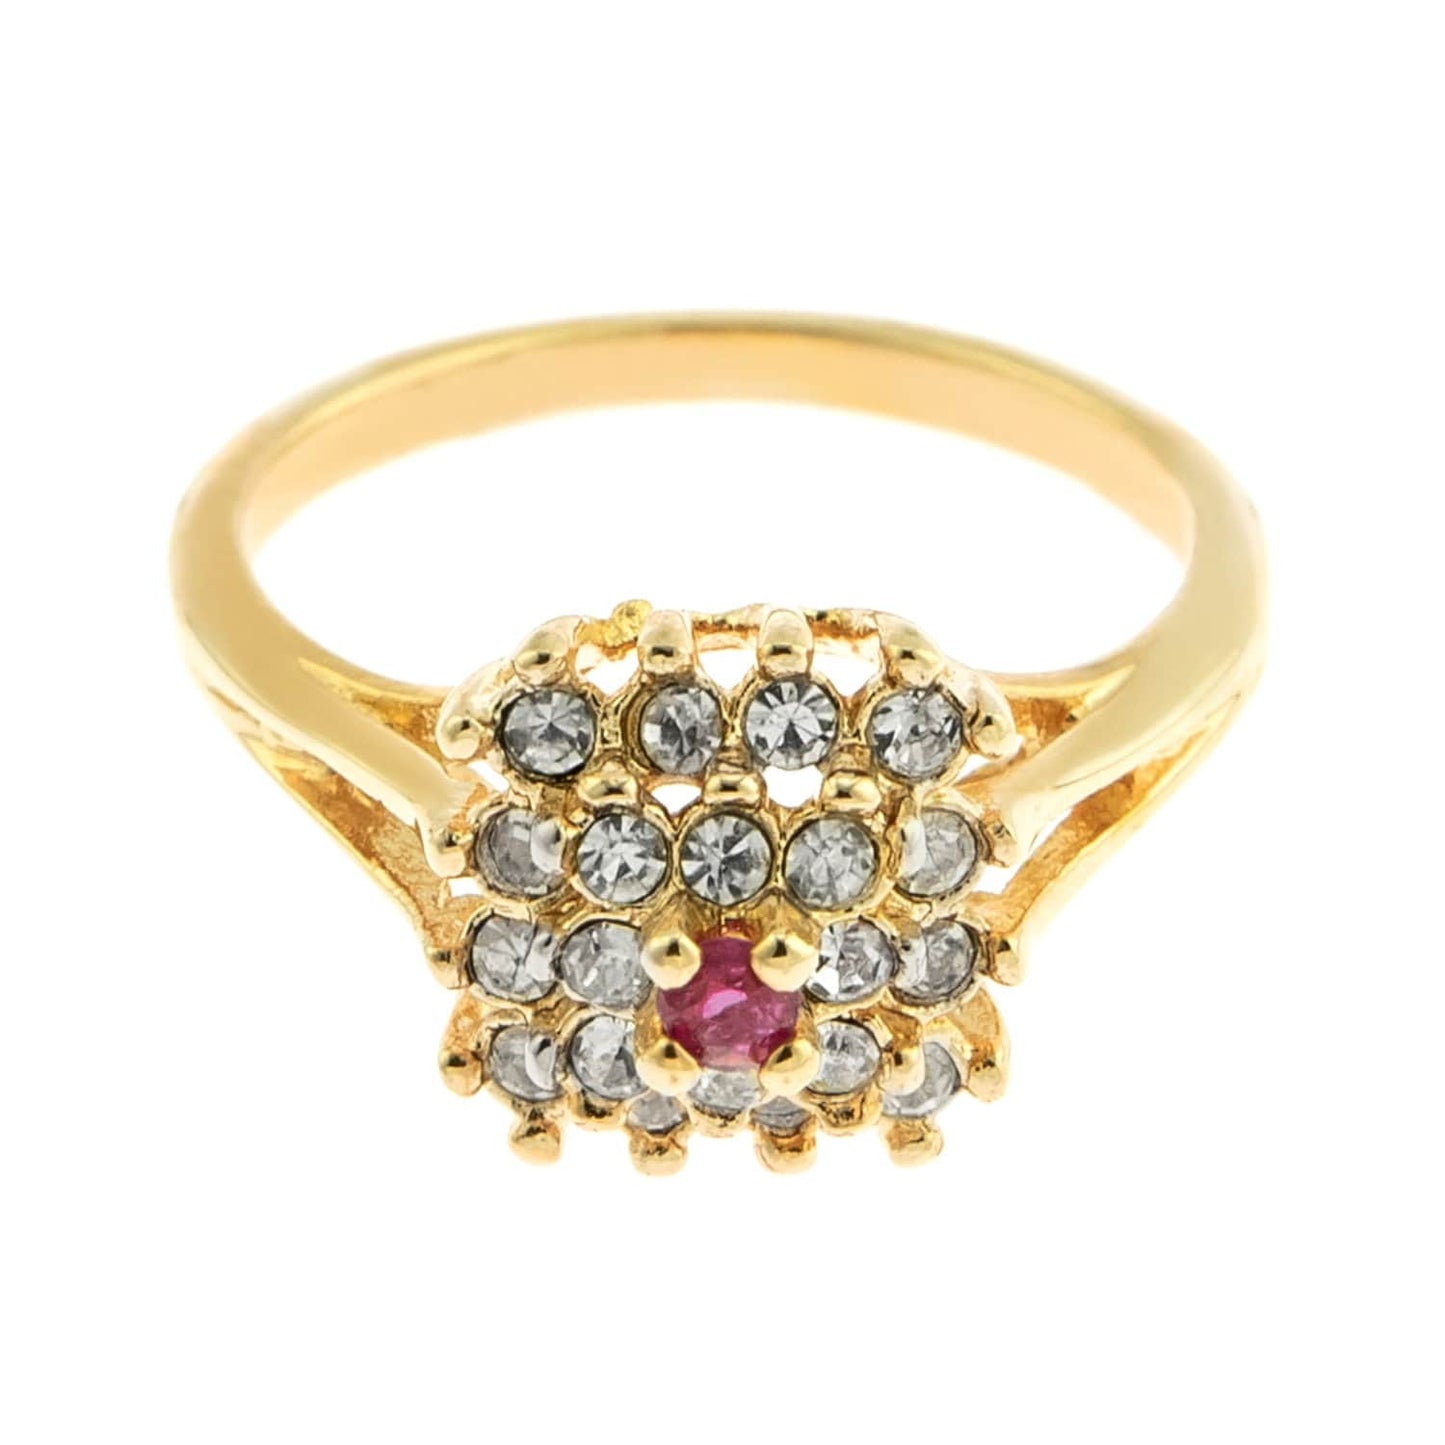 Vintage Ring Genuine Ruby and Clear Swarovski Crystal Ring 18k Gold  R885 - Limited Stock - Never Worn